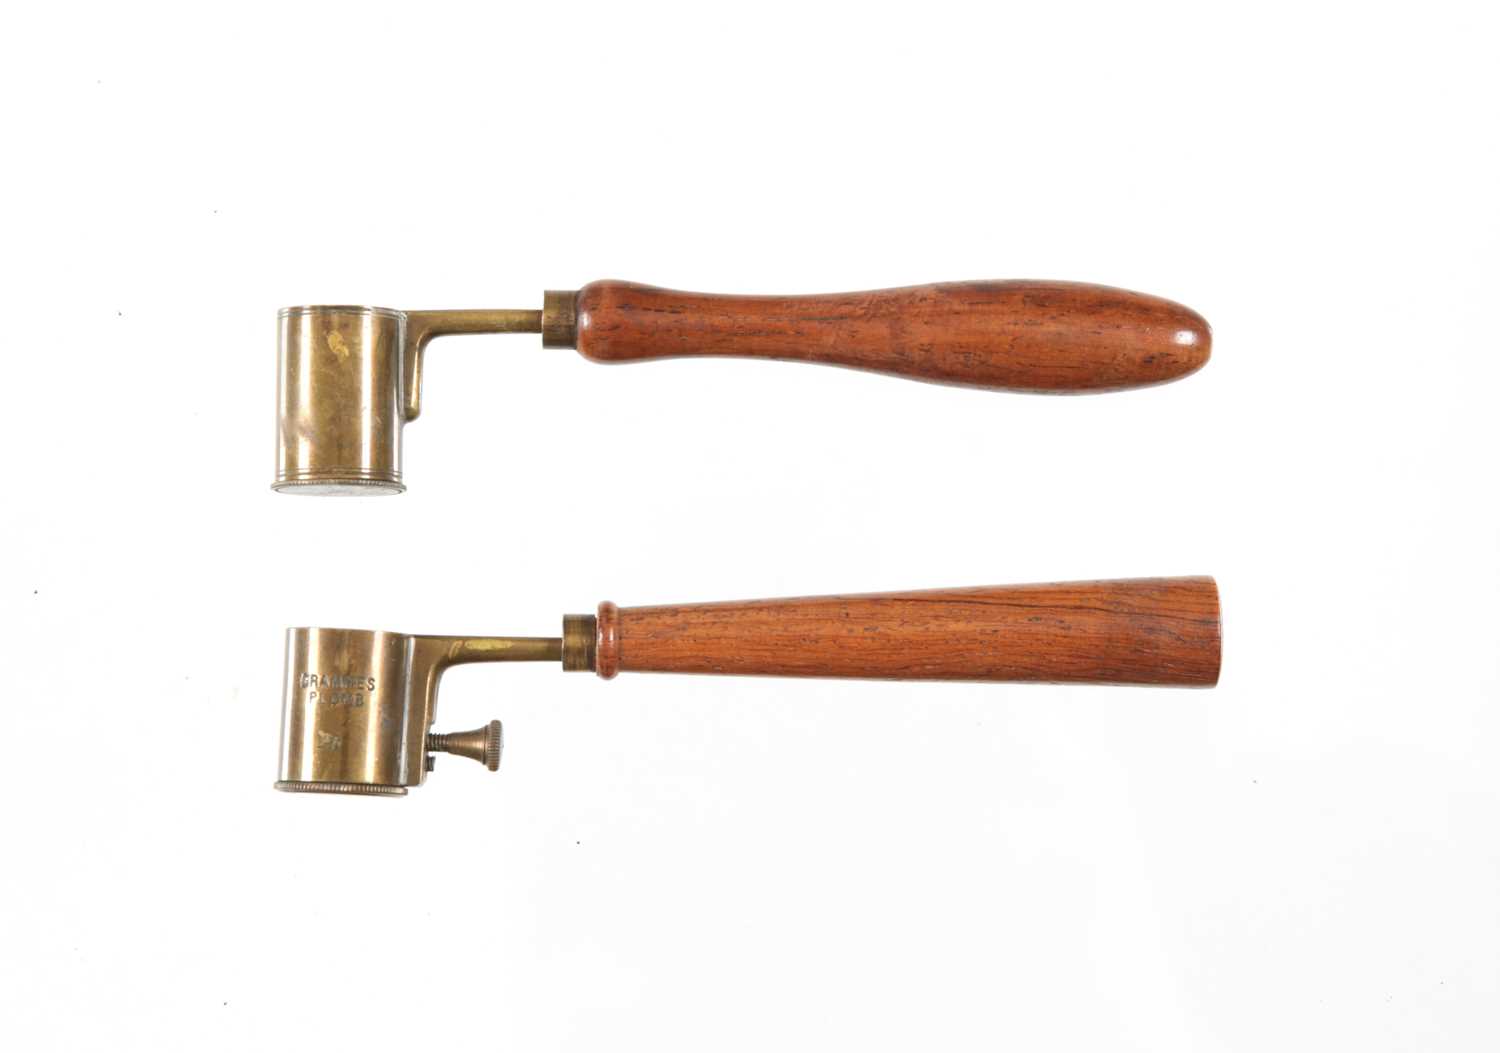 Lot 47 - Two French Powder Fillers For Cartridges